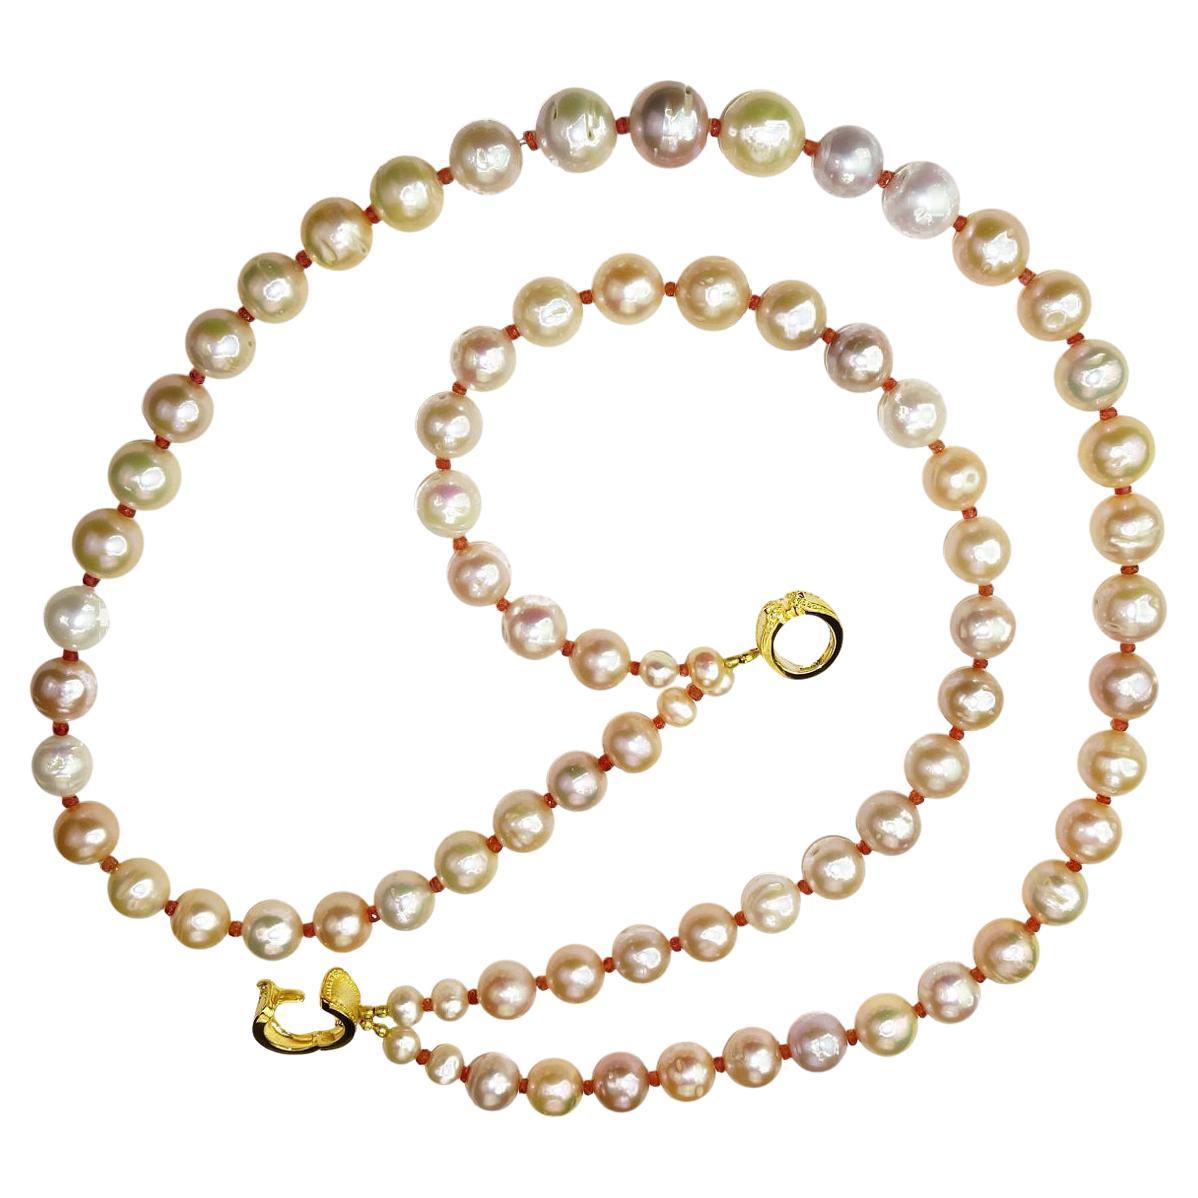 'Nothing gives the luxury of Pearls. Keep them in mind.'  Diana Vreeland

Custom made two strand necklace of Peachy Pink 13-15mm lustrous, iridescent Pearls with a few shades of mauve and cream for accent. These Pearls have a gorgeous luster and